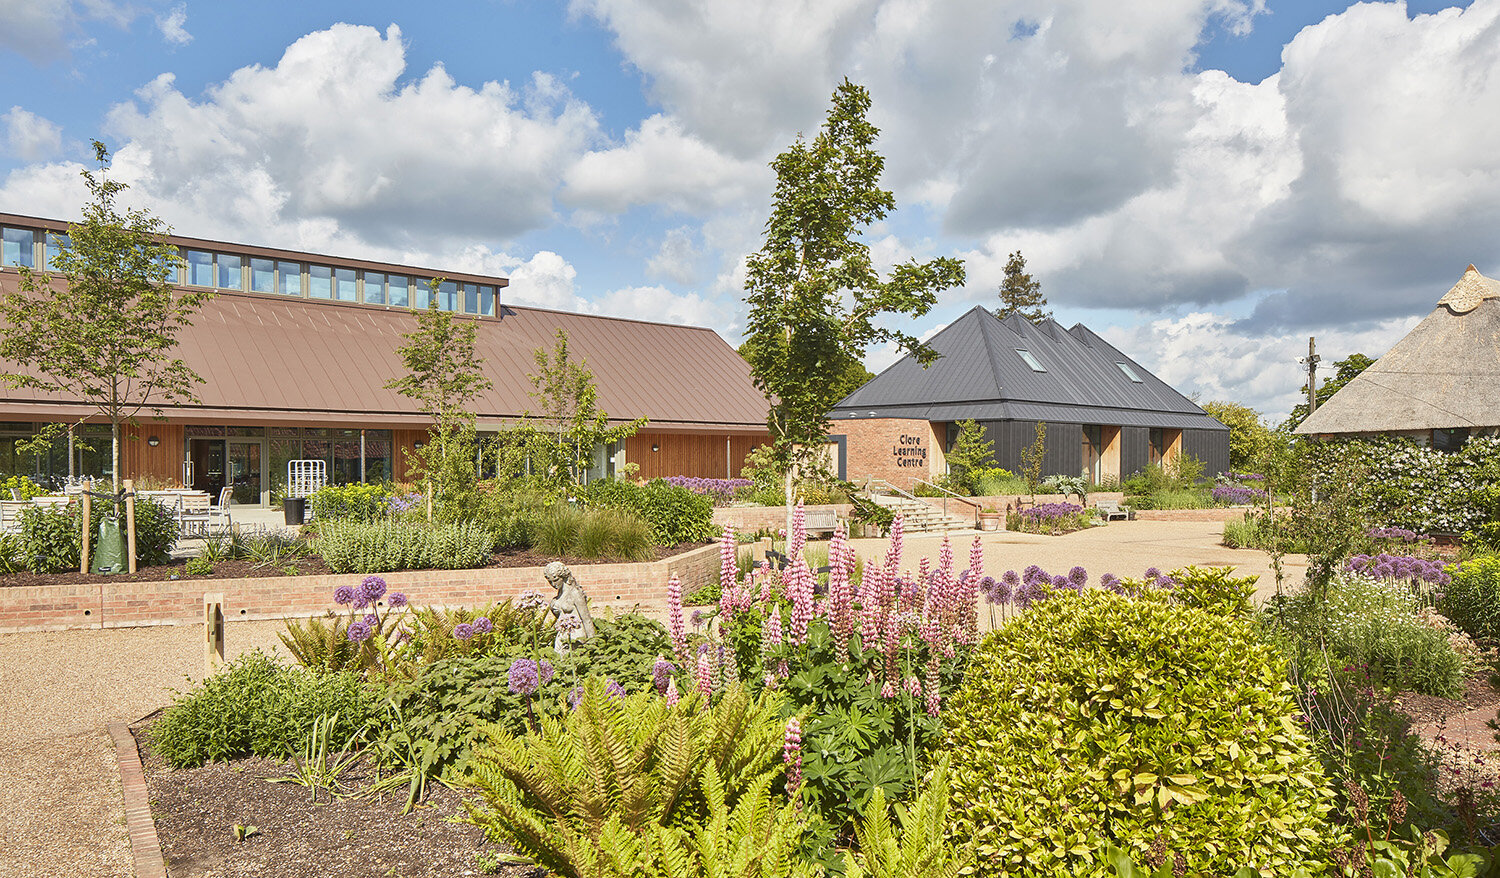 The Clore Education Centre for the Royal Horticultural Society